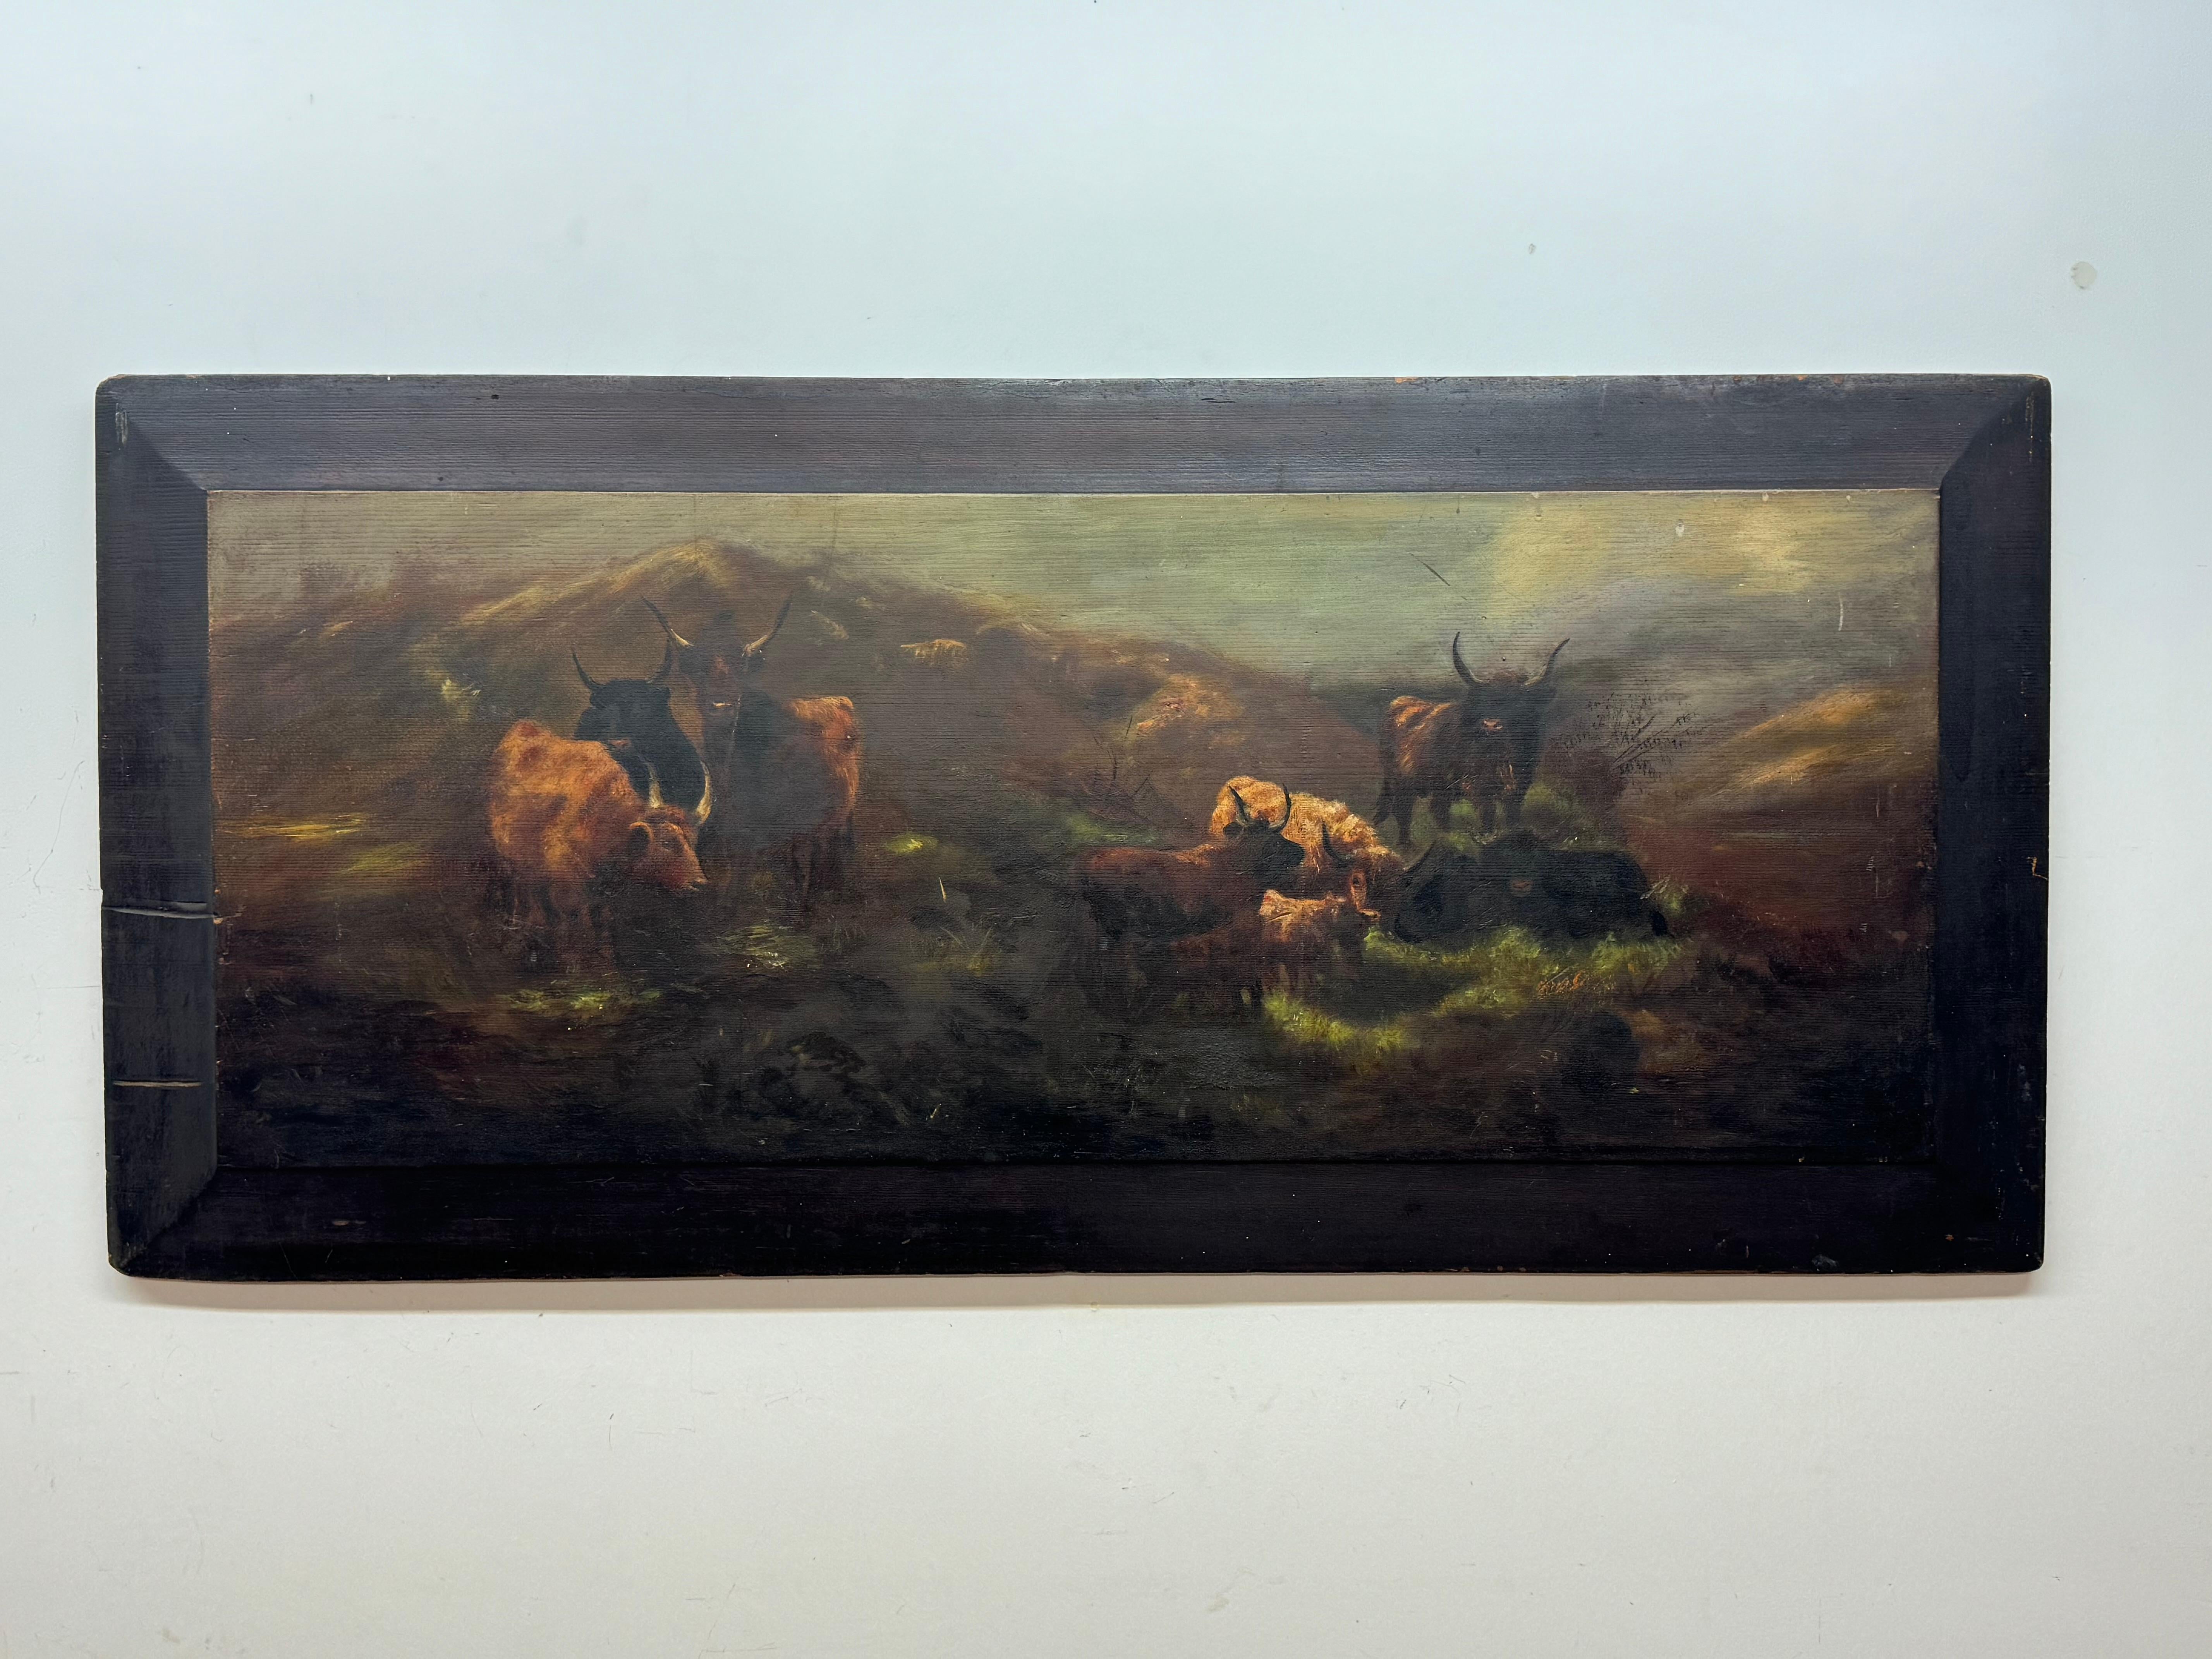 Unknown Landscape Painting - 20th century landscape painting with Cattle on Redwood board